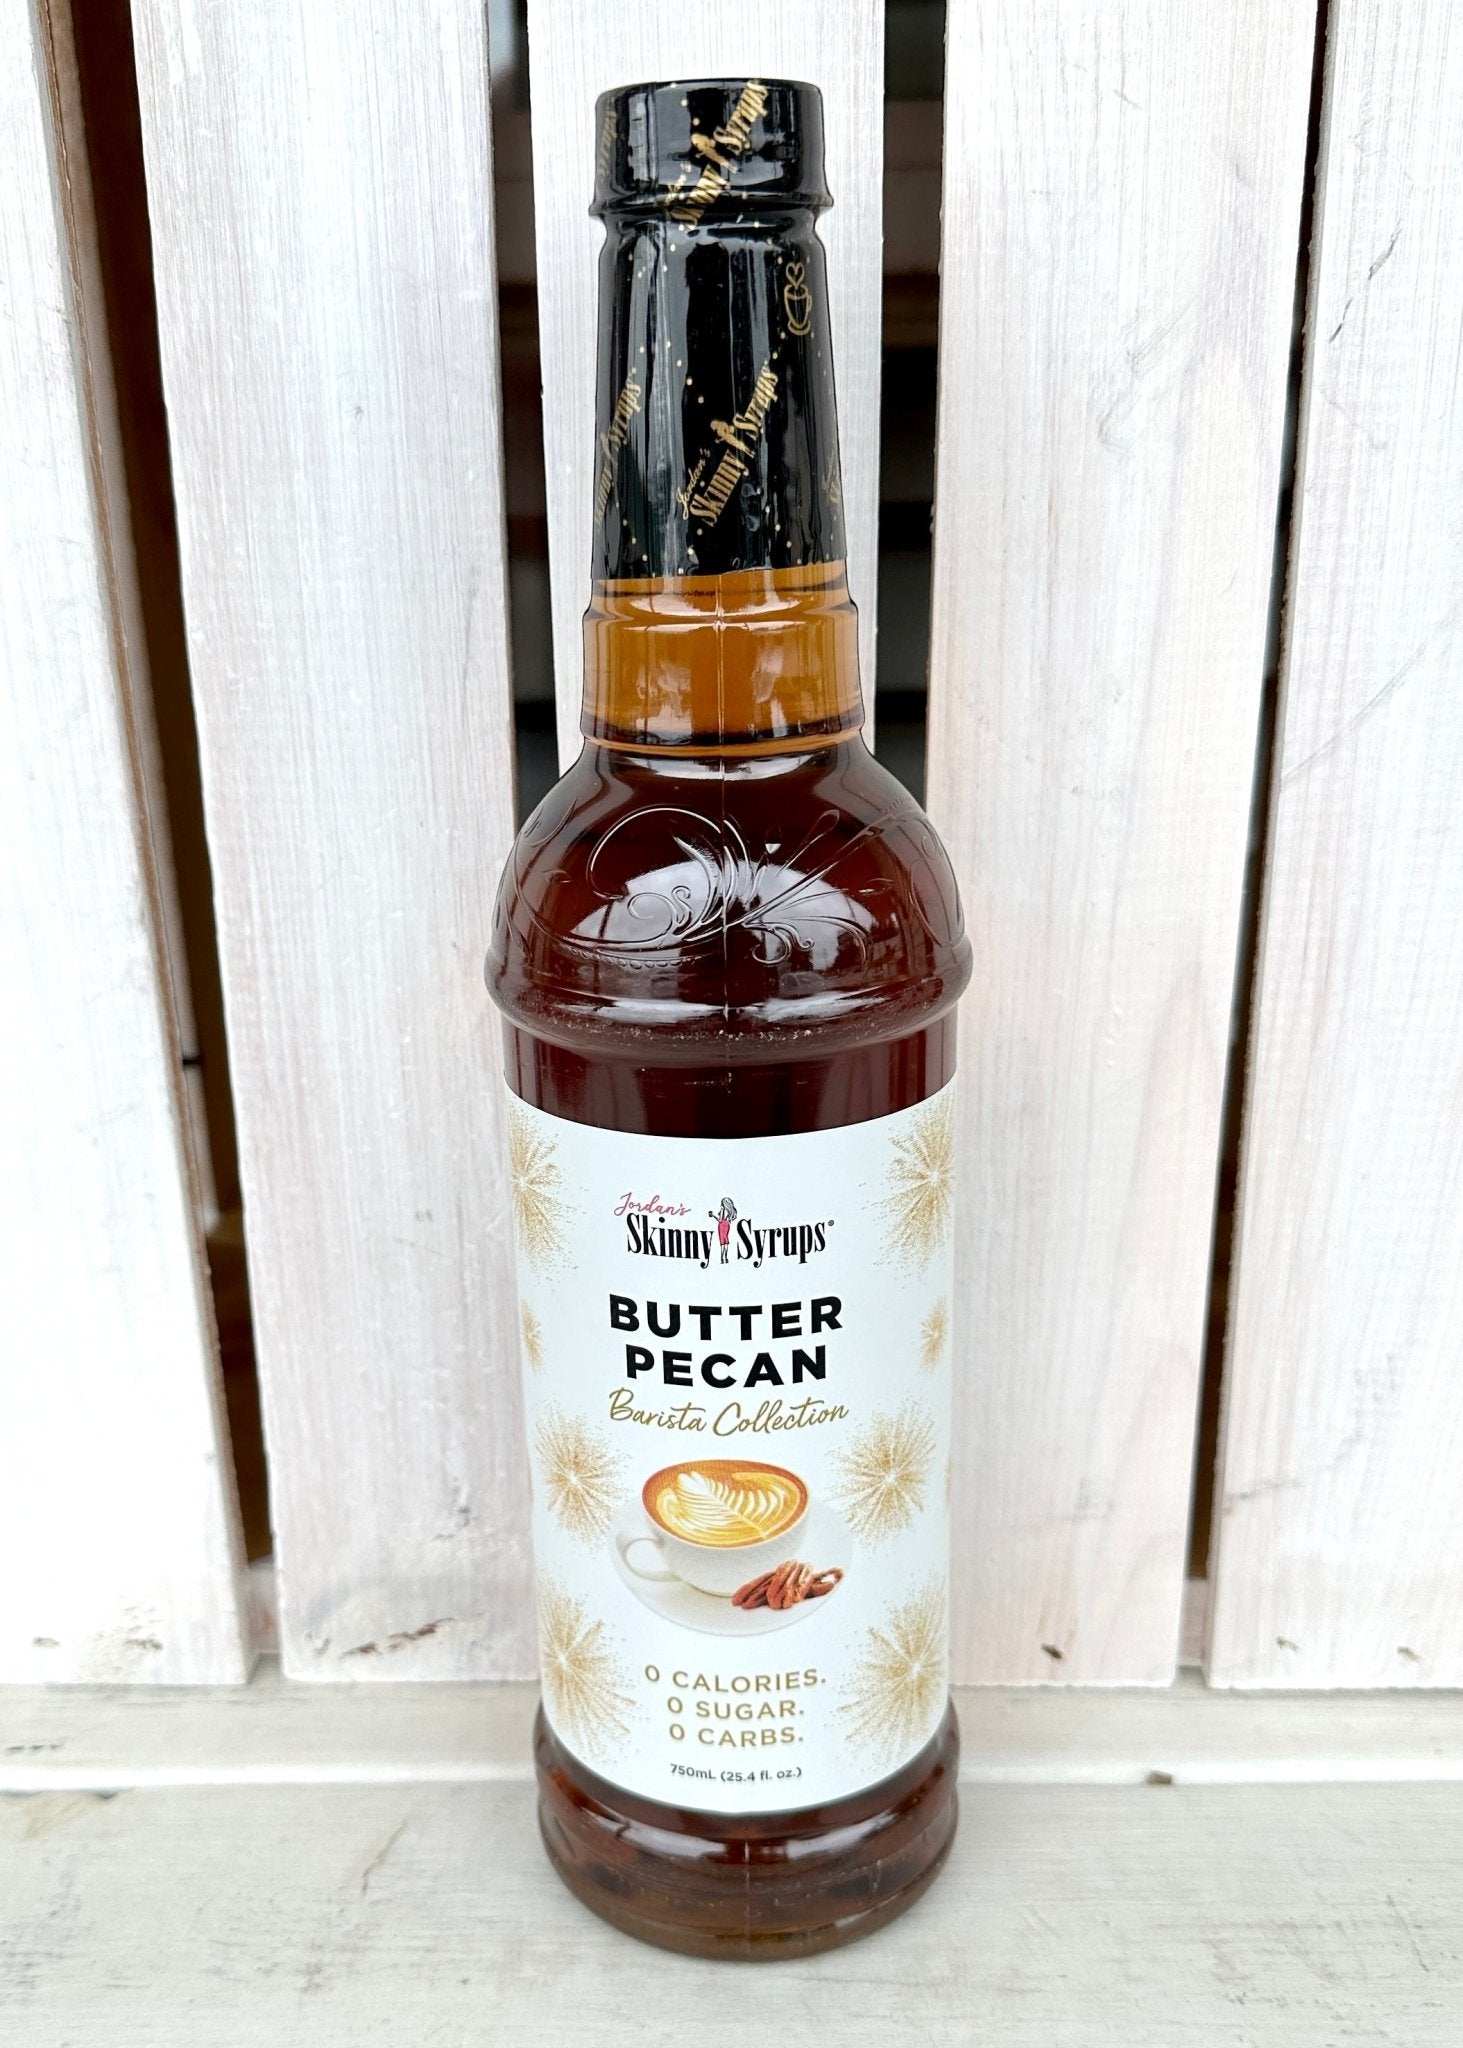 Sugar Free Butter Pecan - Skinny Syrups - 25.4/750ml - Skinny Syrups - Jimberly's Boutique